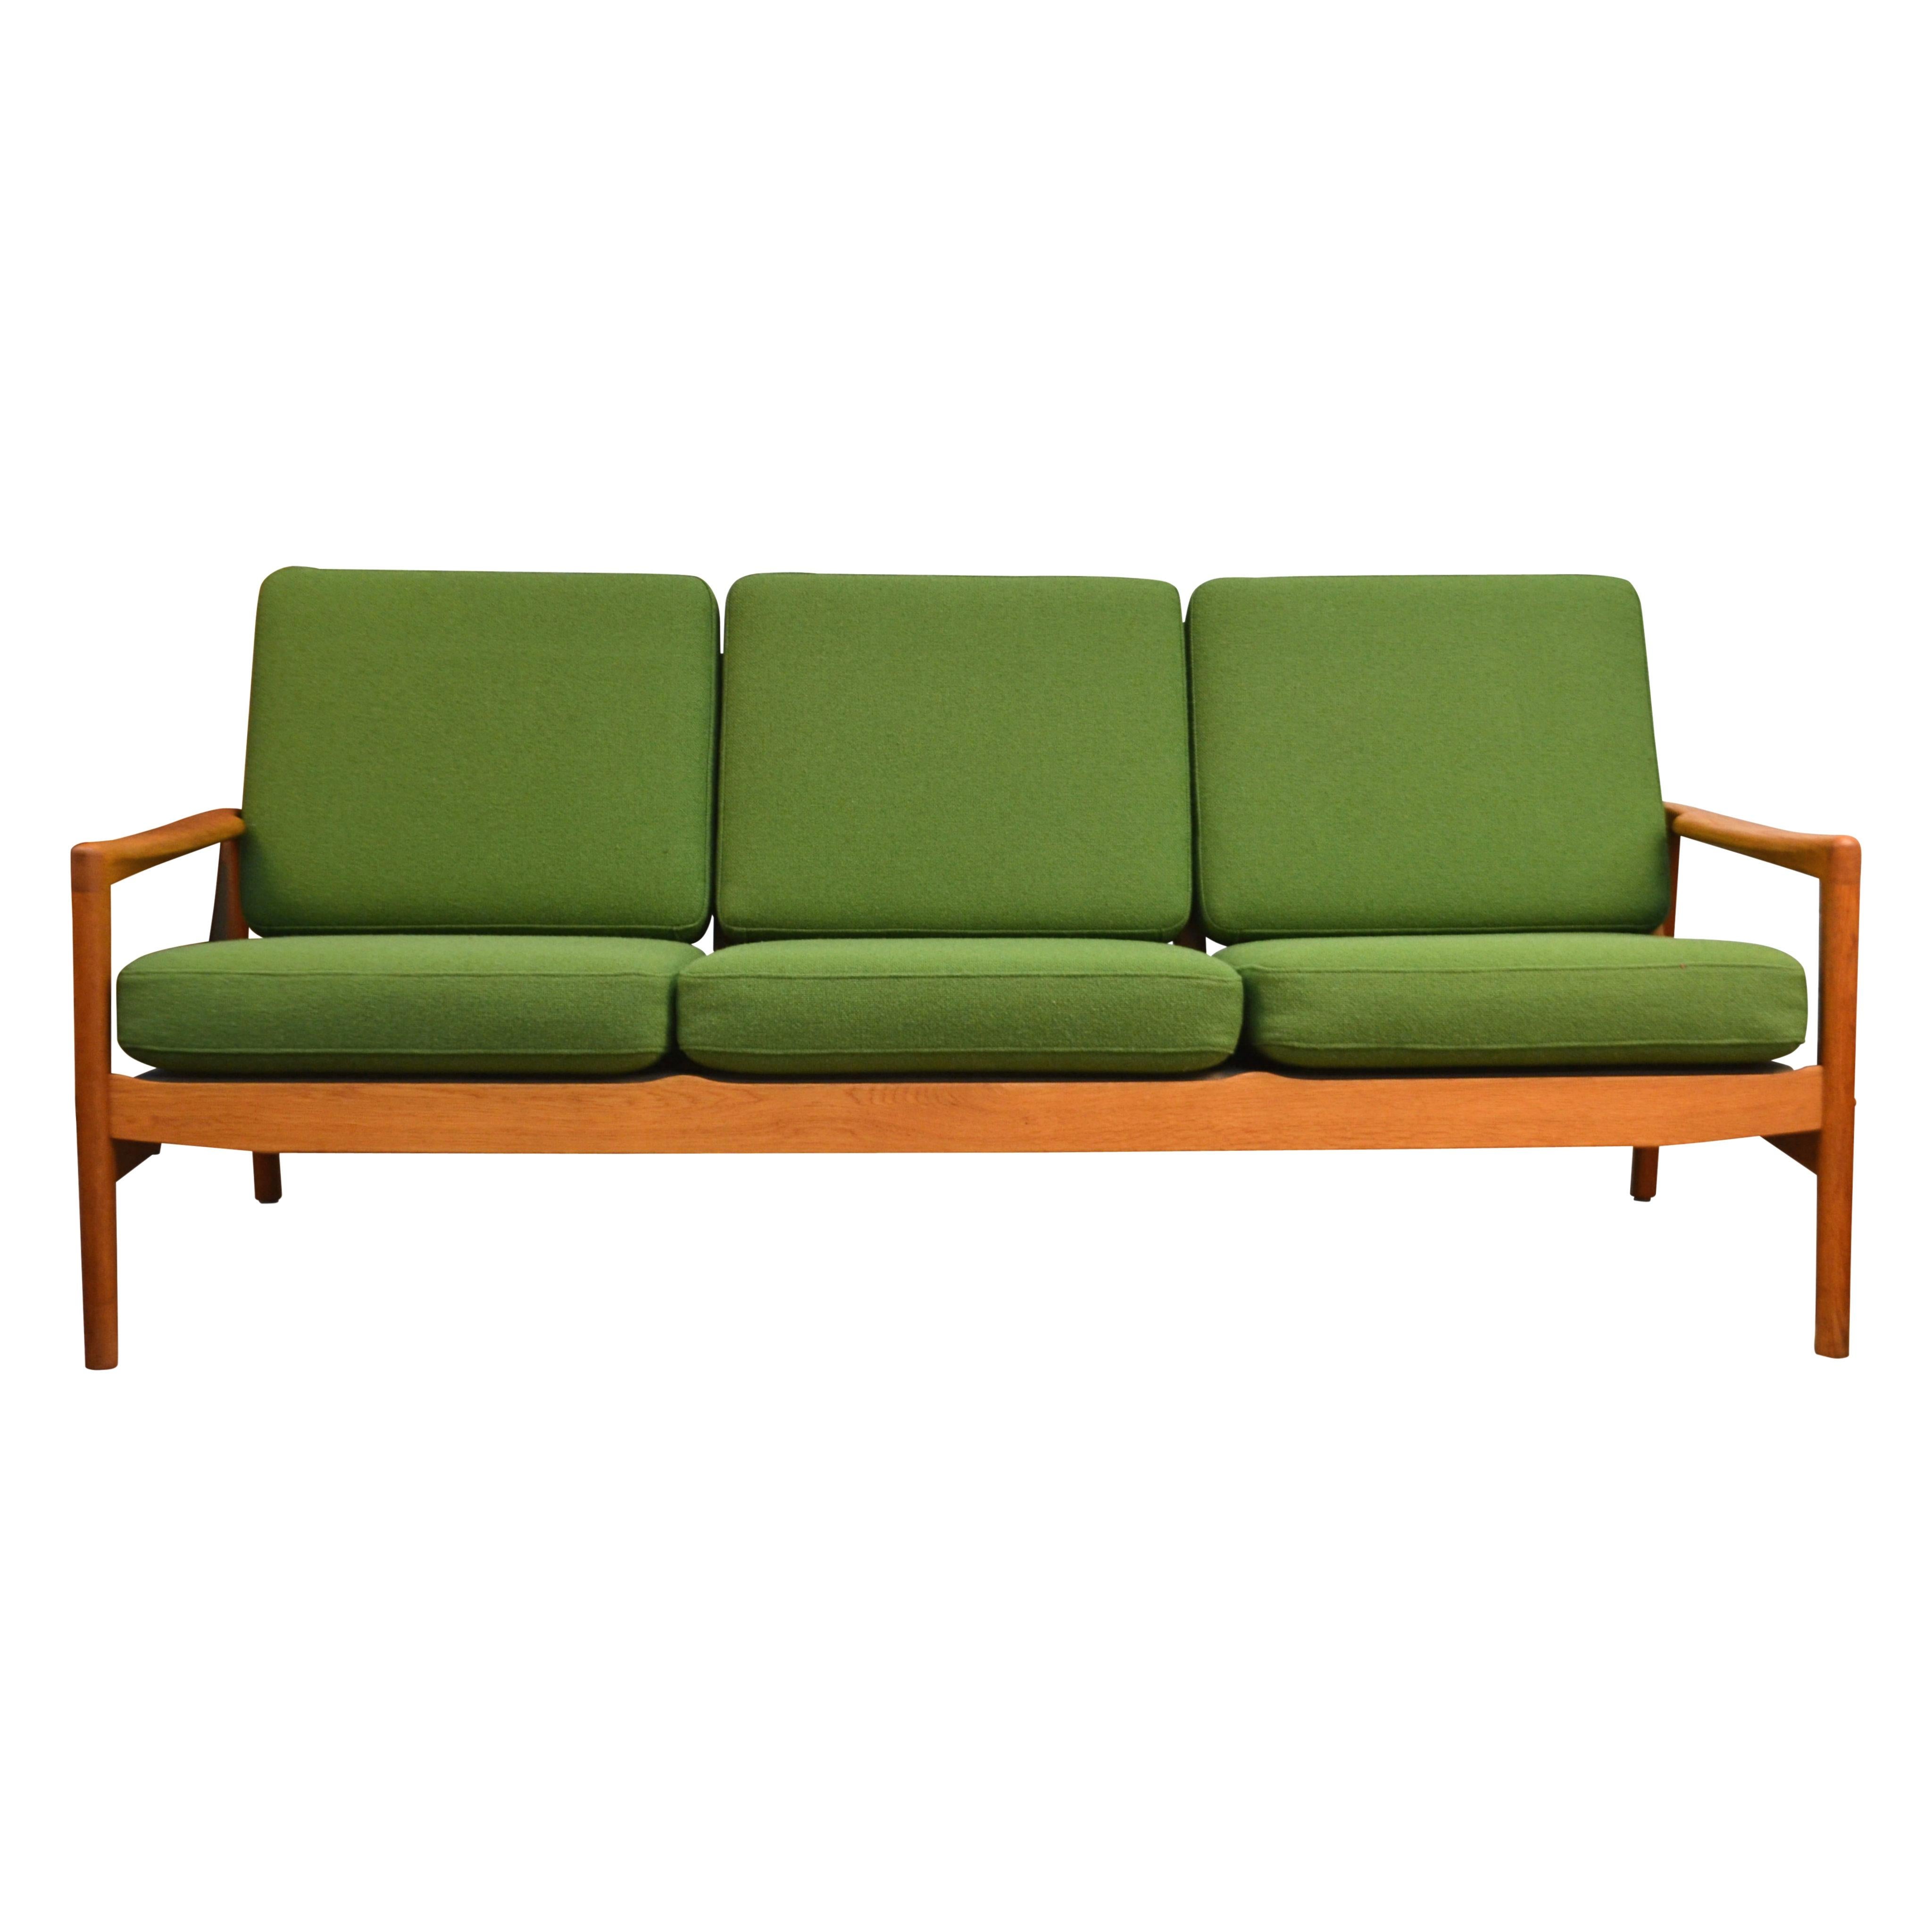 Stunning vintage three-seater sofa designed by Danish designer Hans Olsen for Juul Kristensen. This model 563/3 sofa features a stylish 1960s design, beautiful oak wood, gorgeously sculpted armrests, and comfortable seating. The high quality wool